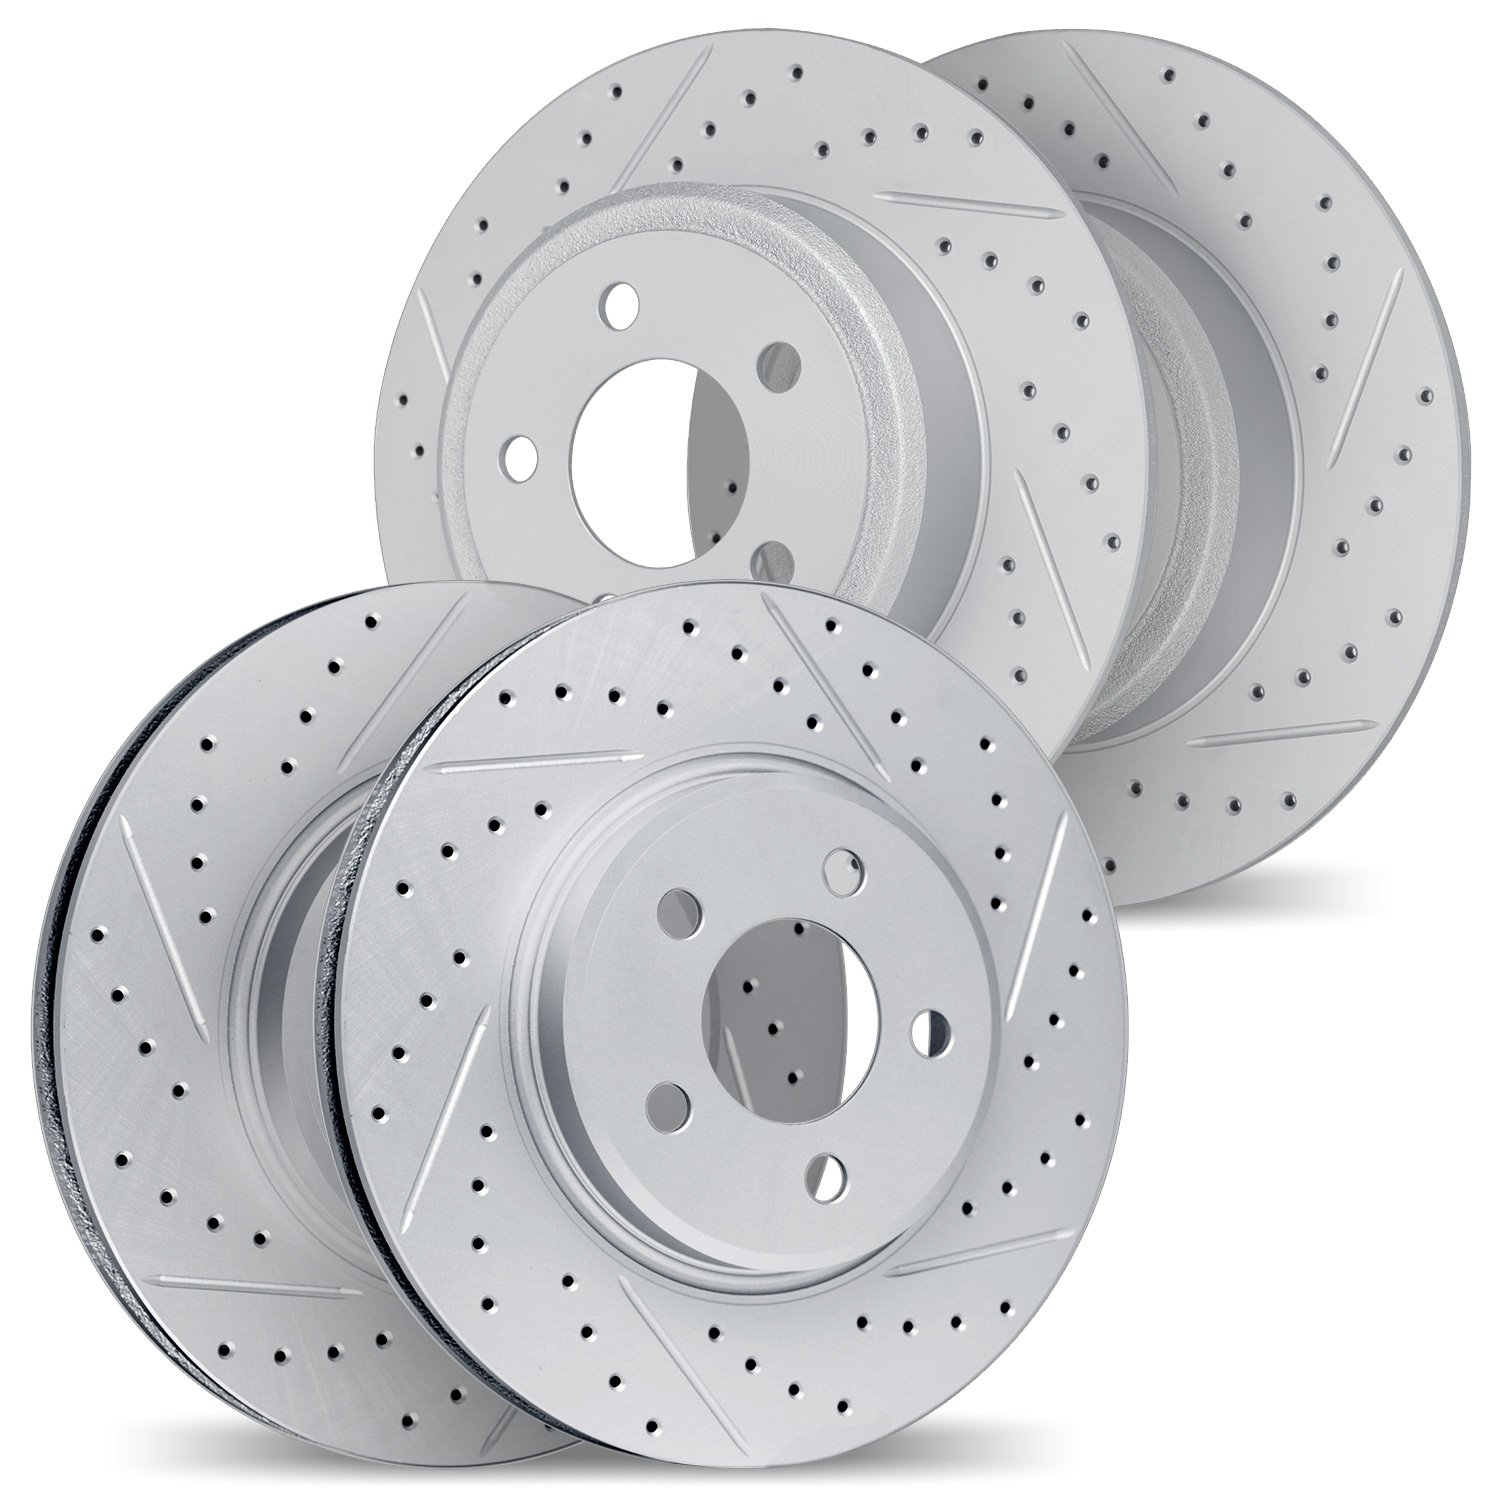 2004-73036 Geoperformance Drilled/Slotted Brake Rotors, Fits Select Audi/Volkswagen, Position: Front and Rear